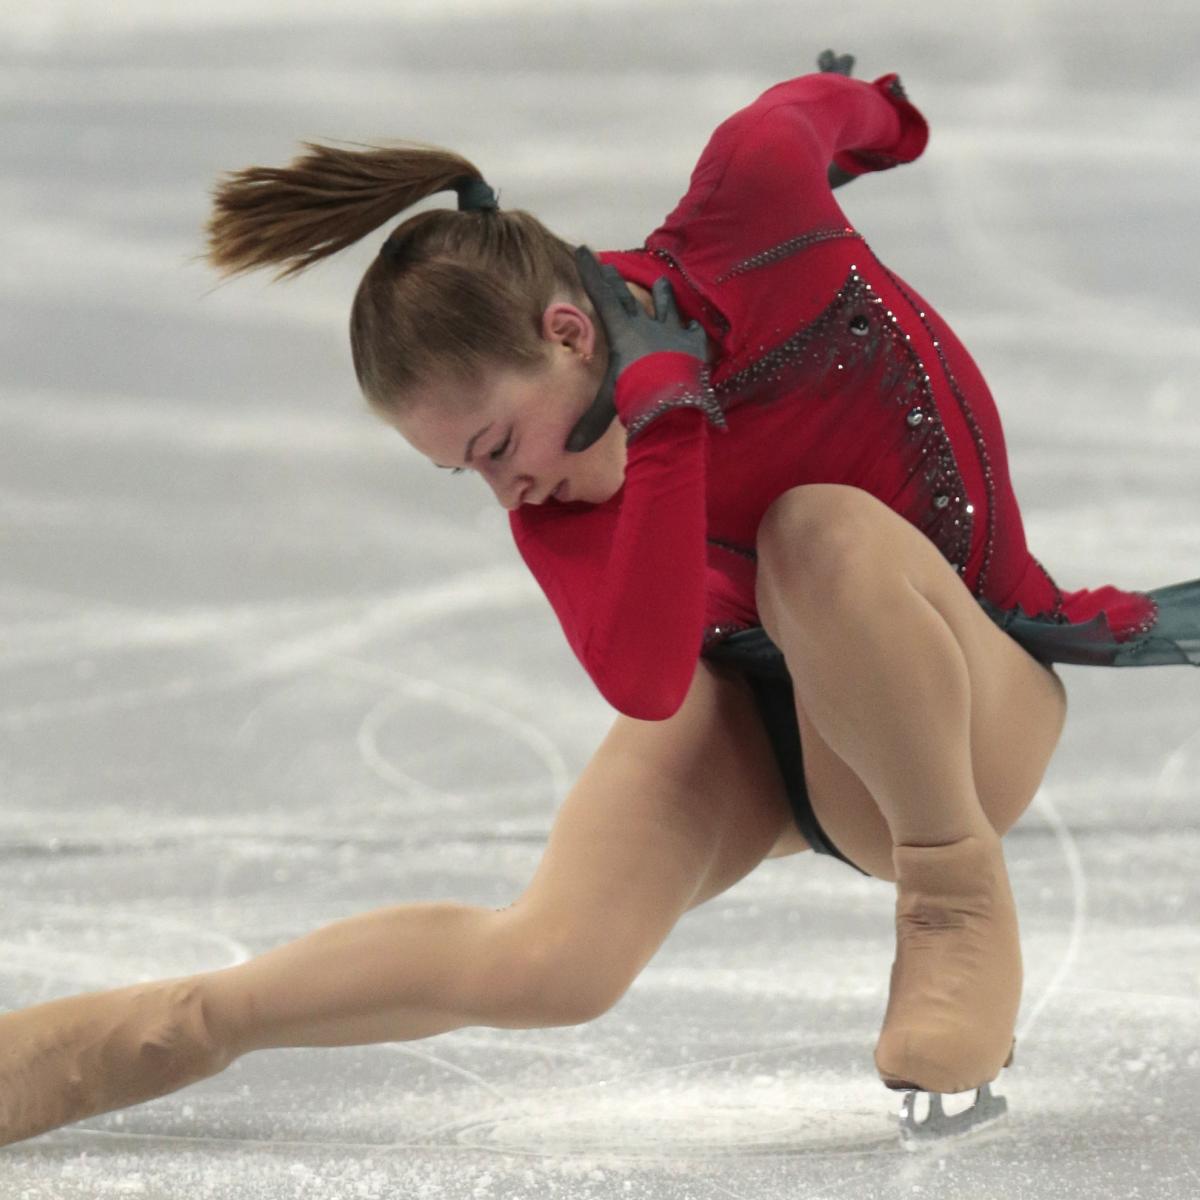 Women's Figure Skating Olympics 2014: Schedule, Medal Predictions for Free Skate | News, Scores